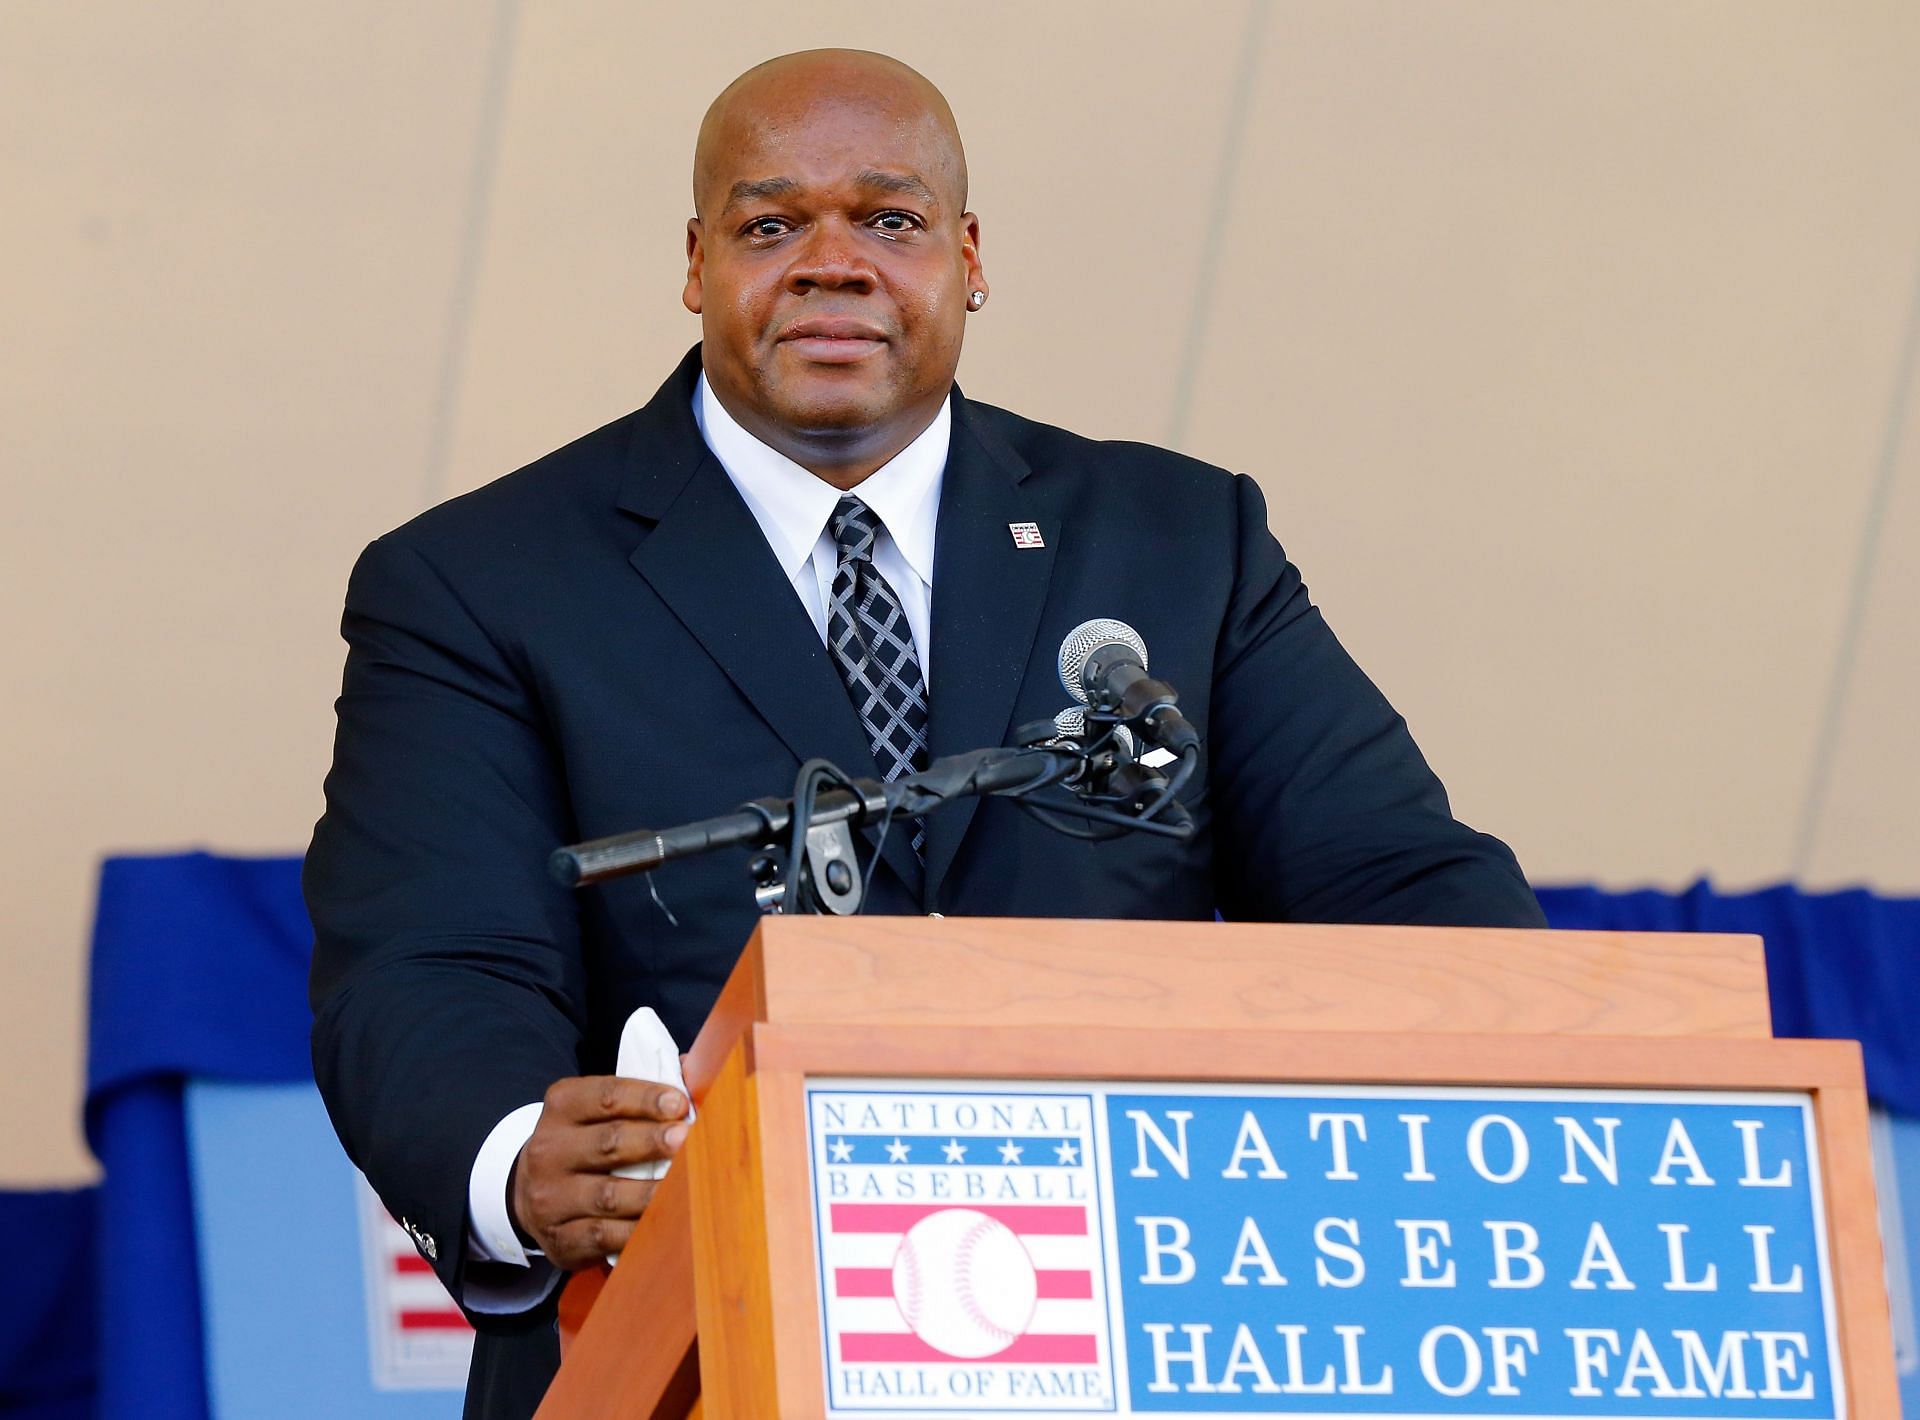 The Life And Career Of Frank Thomas (Complete Story)